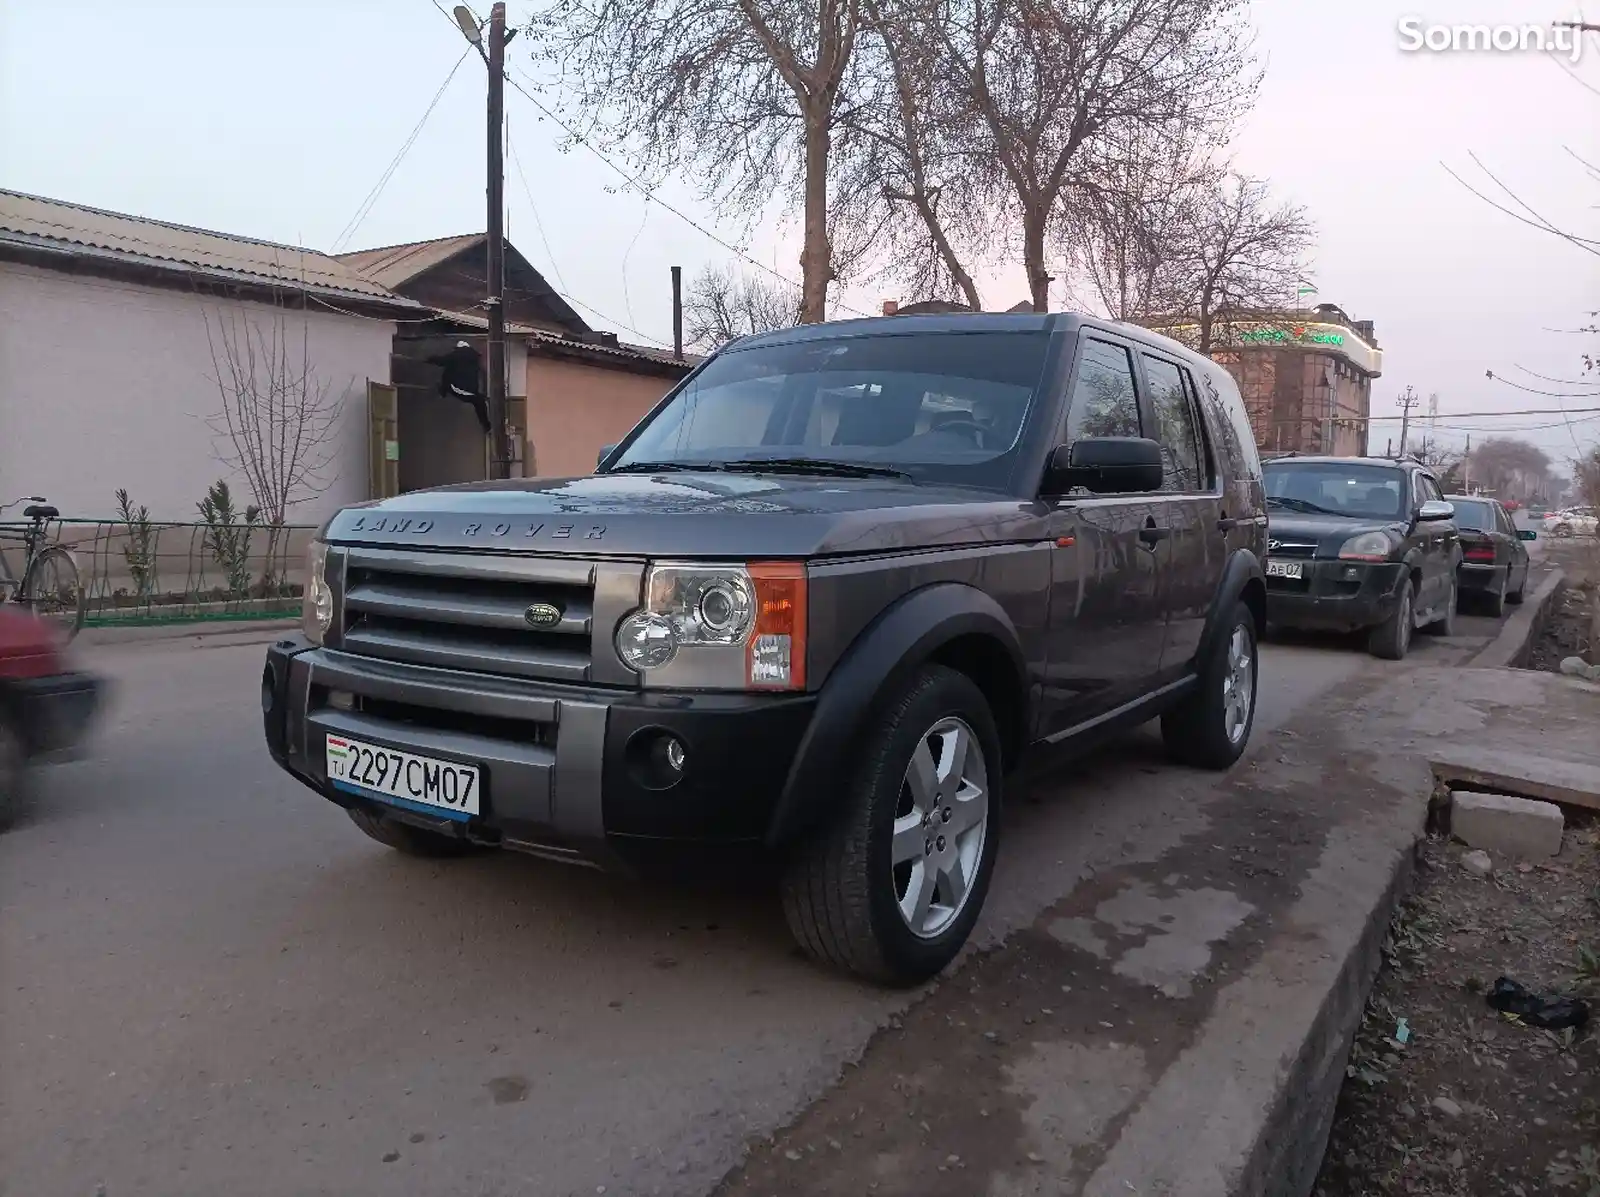 Land Rover Discovery, 2007-2